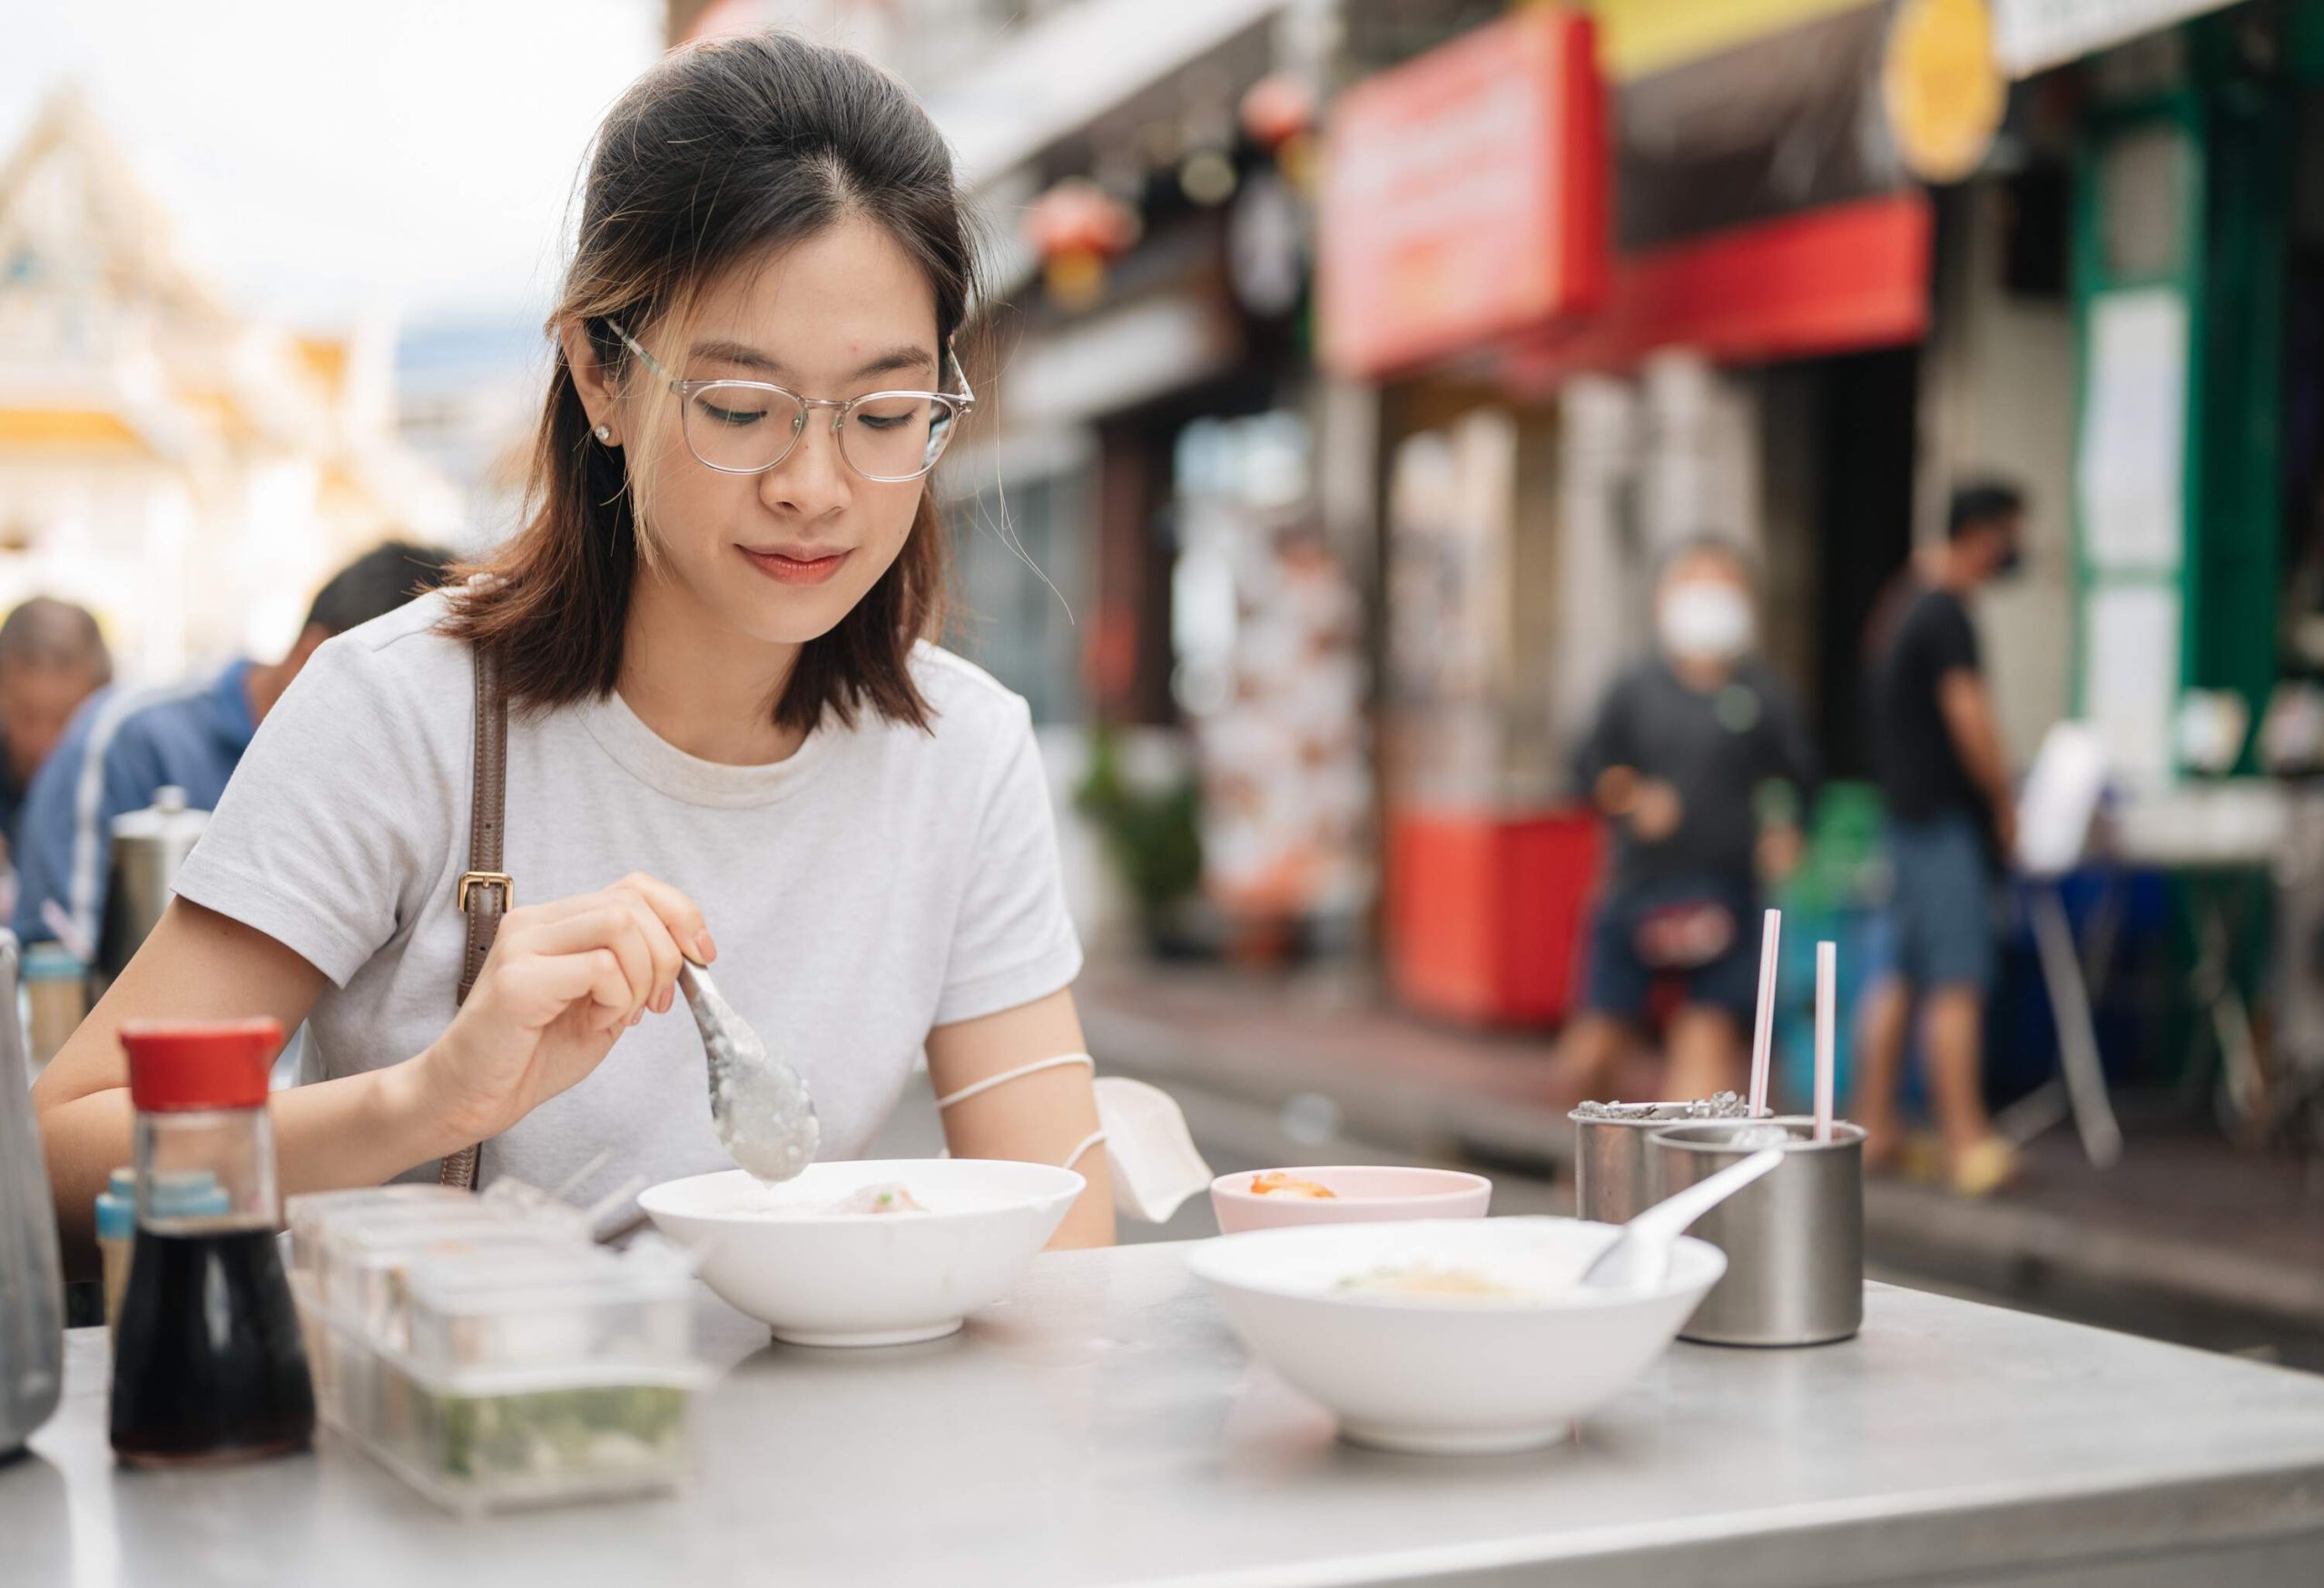 Woman in a white shirt and eyeglasses sits on a table mixing at a bowl of porridge.